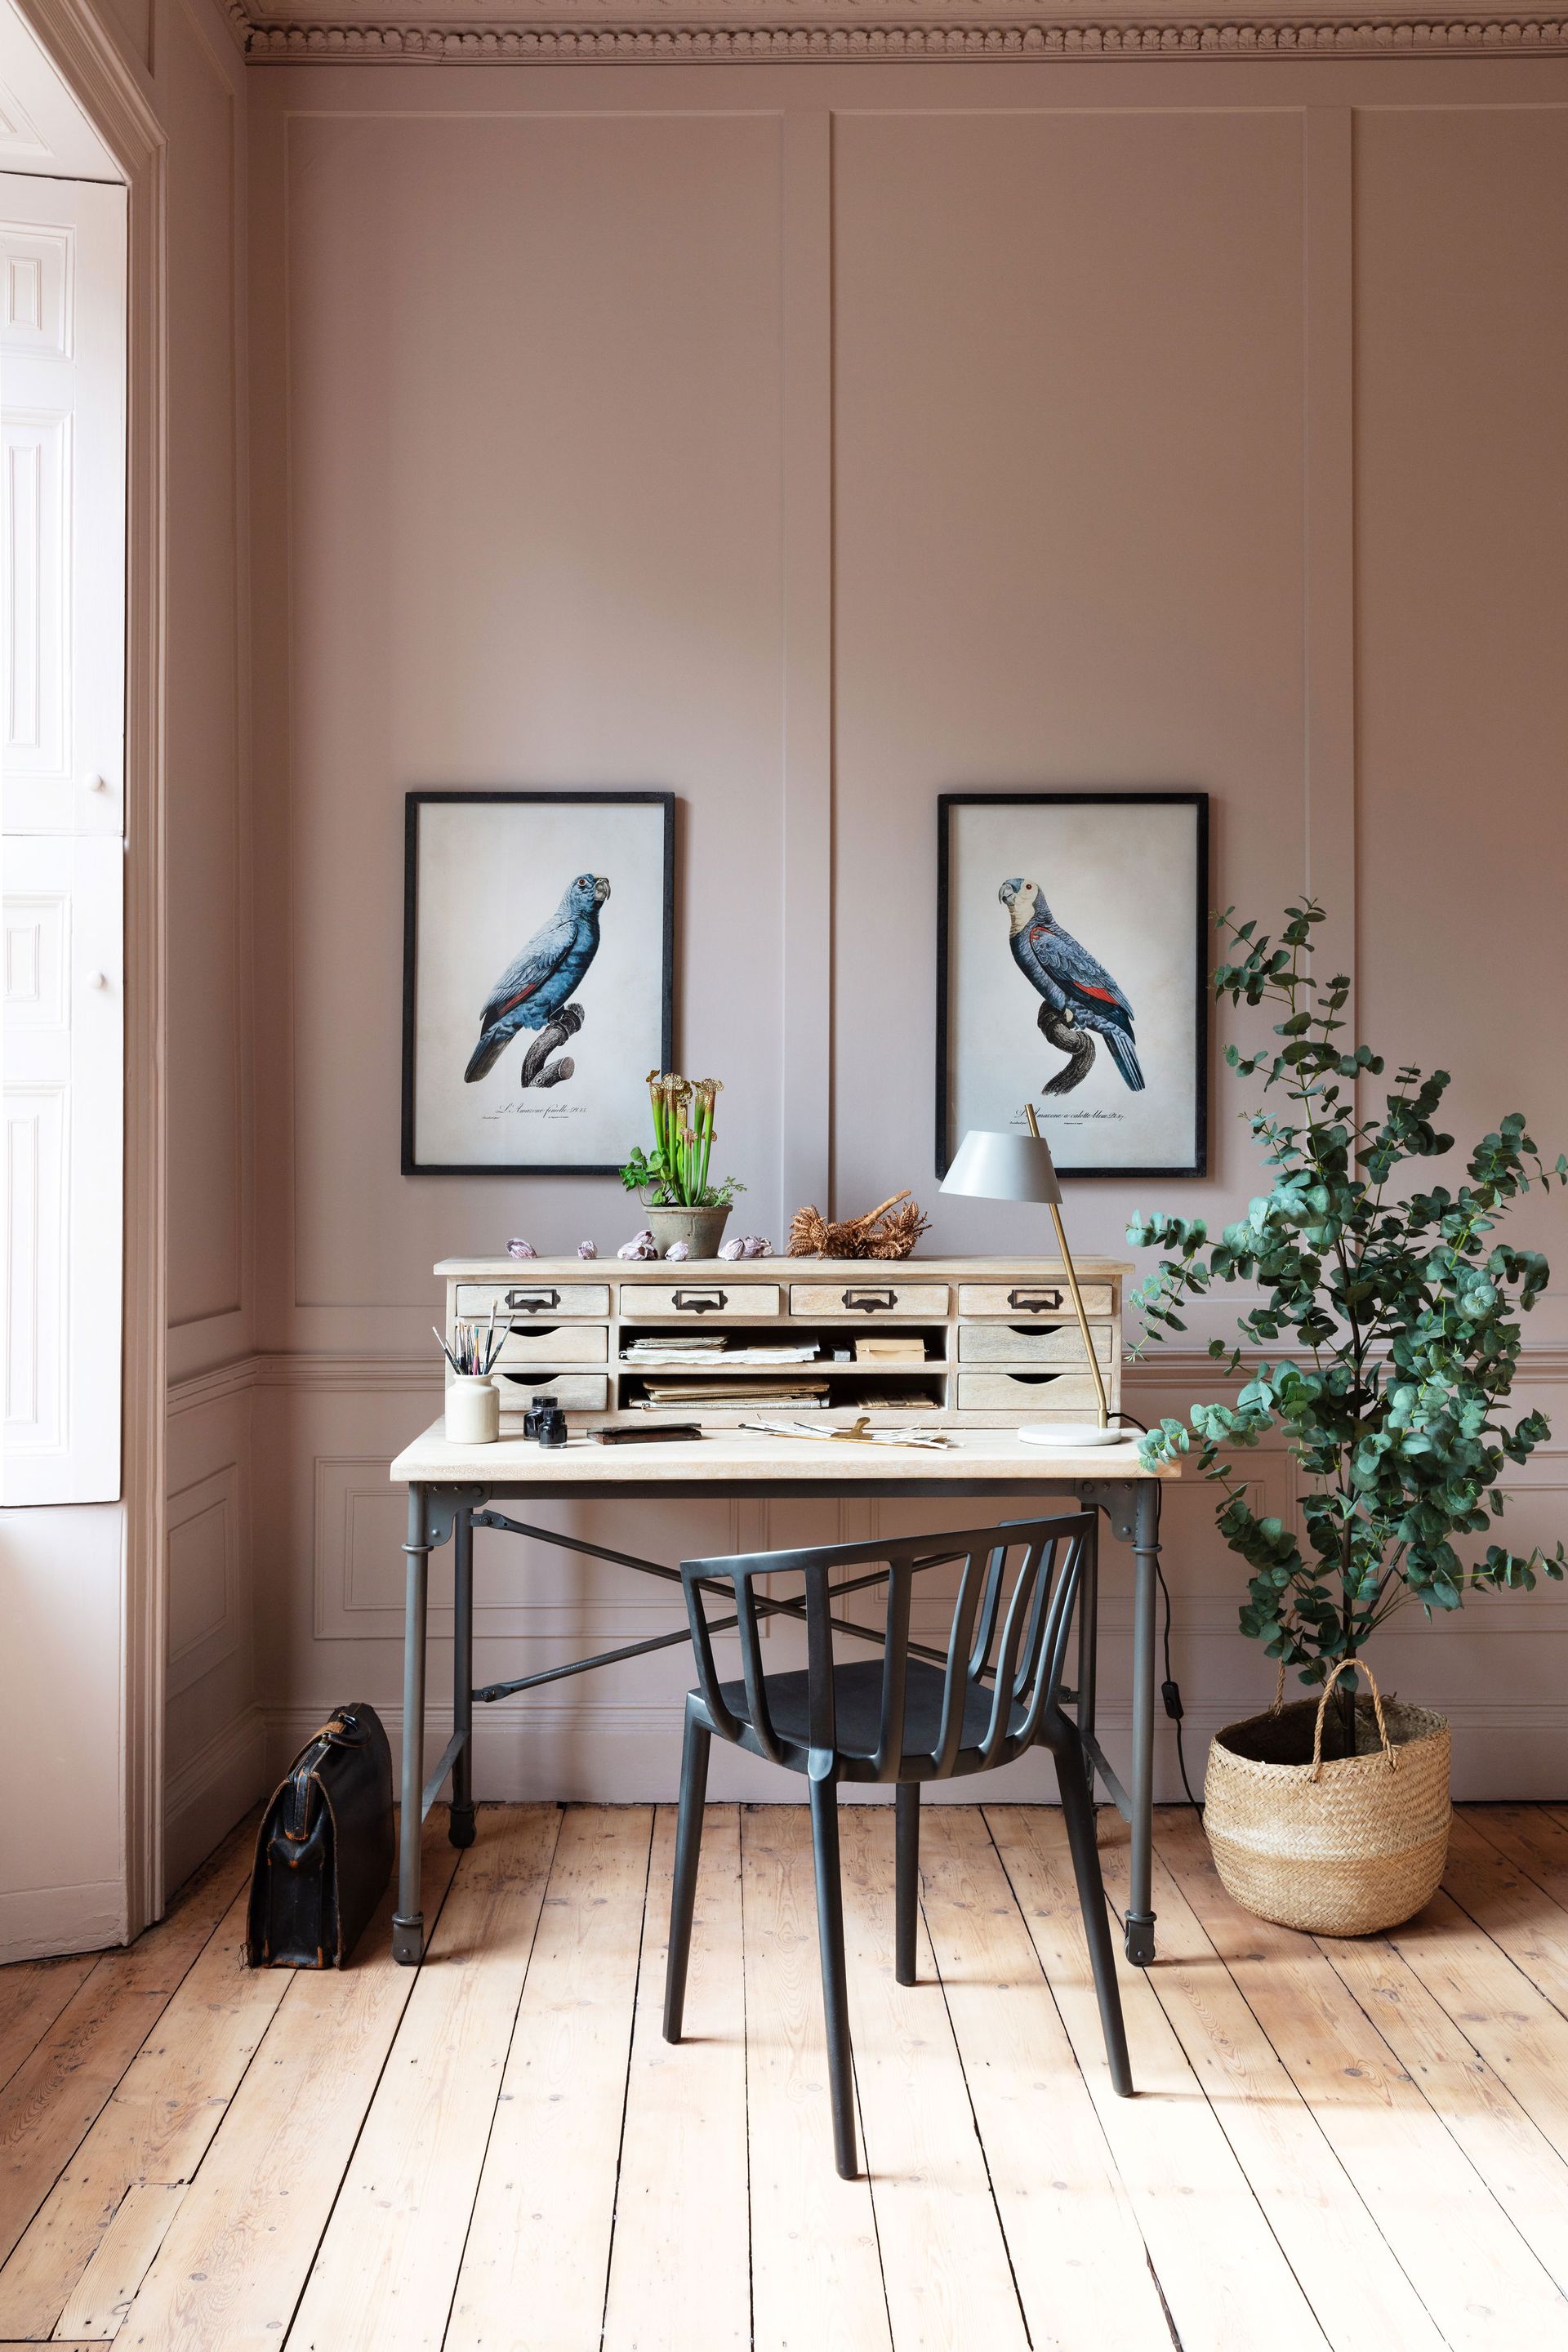 <p>                     This piece of furniture will – probably – dominate your room and it is where you will be posted all day long, so it has to be right.                    </p>                                      <p>                     Designer Kelly Wearstler makes the desk the star of her home office design – showing that even when space is limited choosing a desk that’s a beautiful piece of furniture in its own right can make yours an inspiring space to spend your days.                   </p>                                      <p>                     In her own work space, Kelly keeps her collection of art and design books close by, displaying them on a nearby wall for ‘visual texture and stimulation’, she says.                     </p>                                      <p>                     If your work area is part of another room, being able to clear everything away at the end of the day can be vital for wellbeing, which is where hidden desk ideas come in.                   </p>